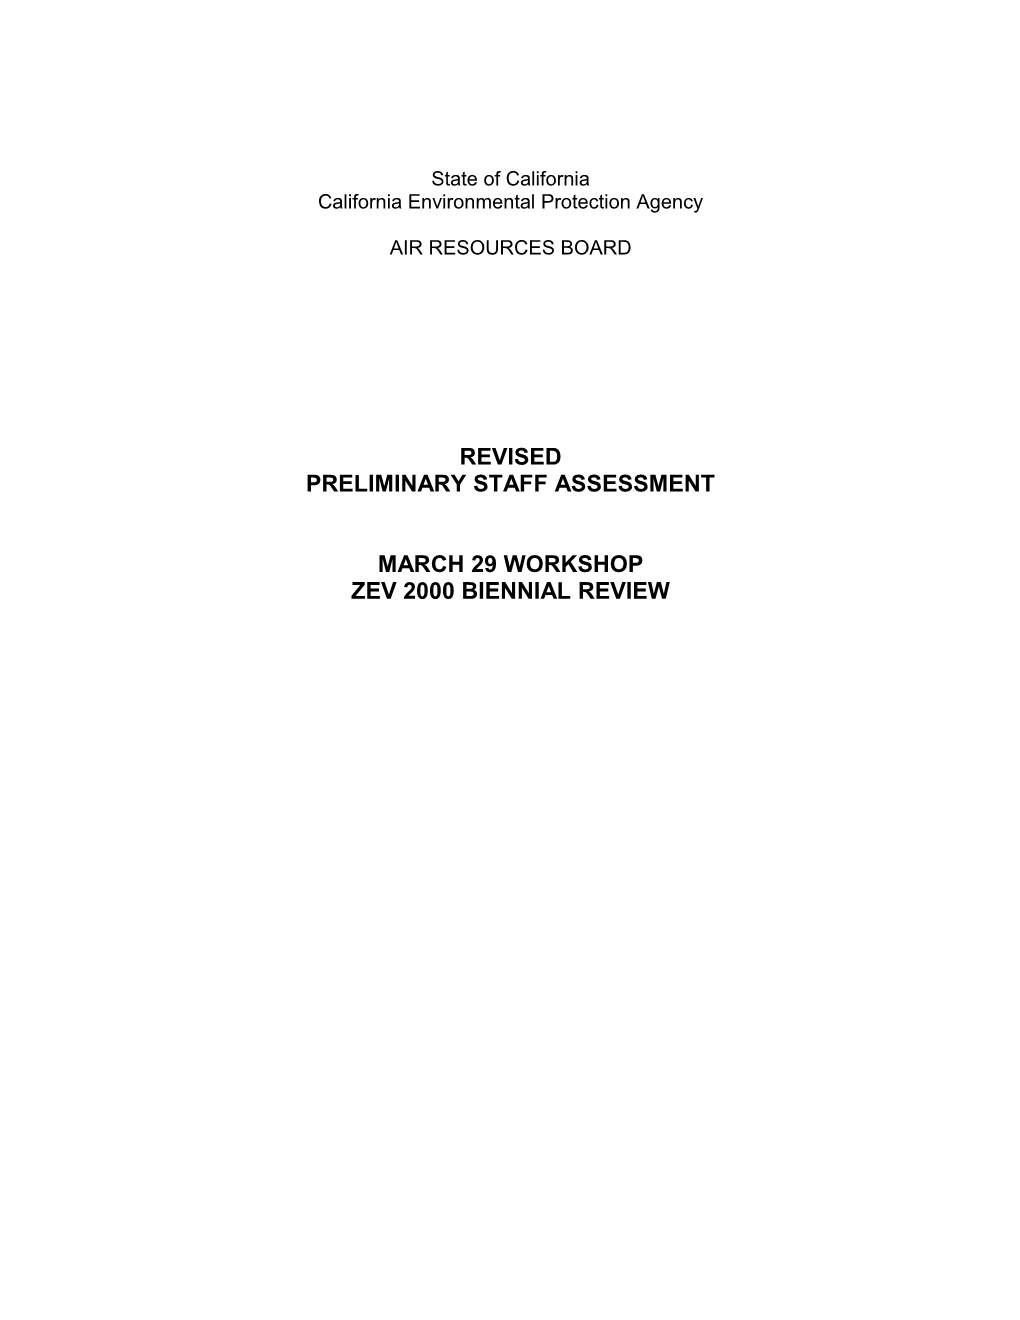 Preliminary Staff Assessment Revised